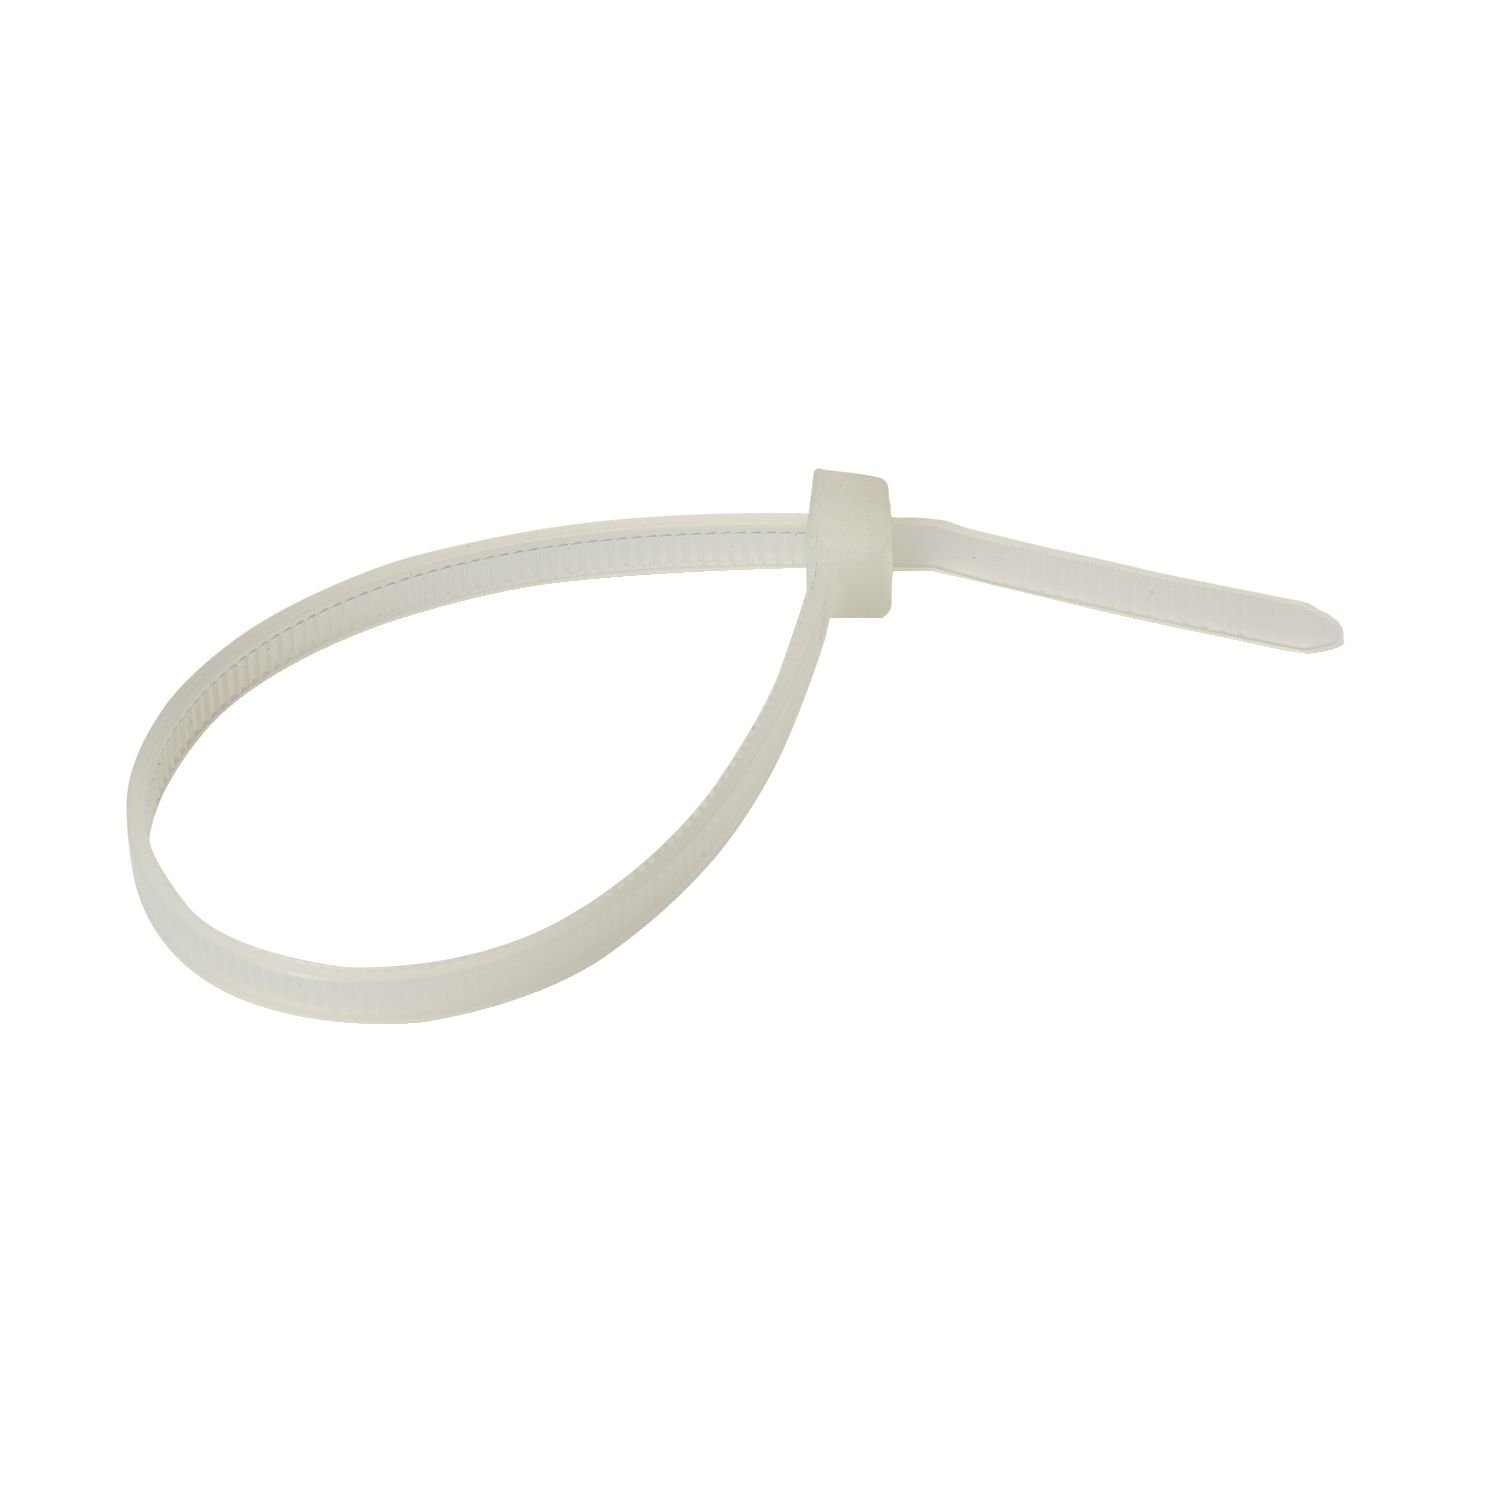 IMT46919 Thorsman - cable tie - natural - 4.8 x 300 mm